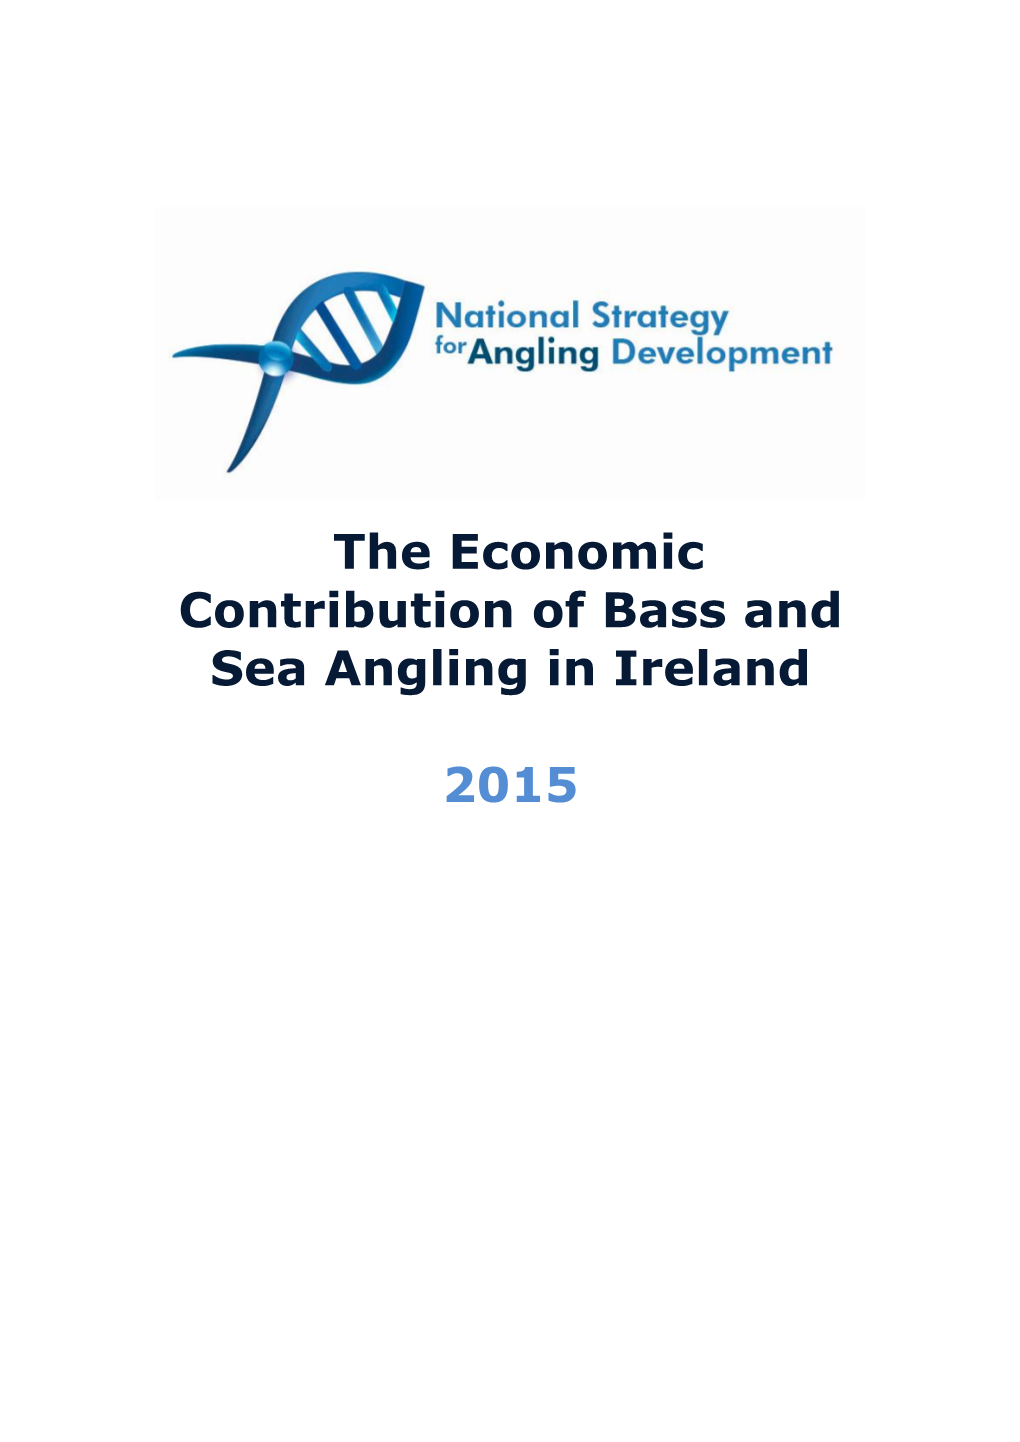 The Economic Contribution of Bass and Sea Angling in Ireland 2015